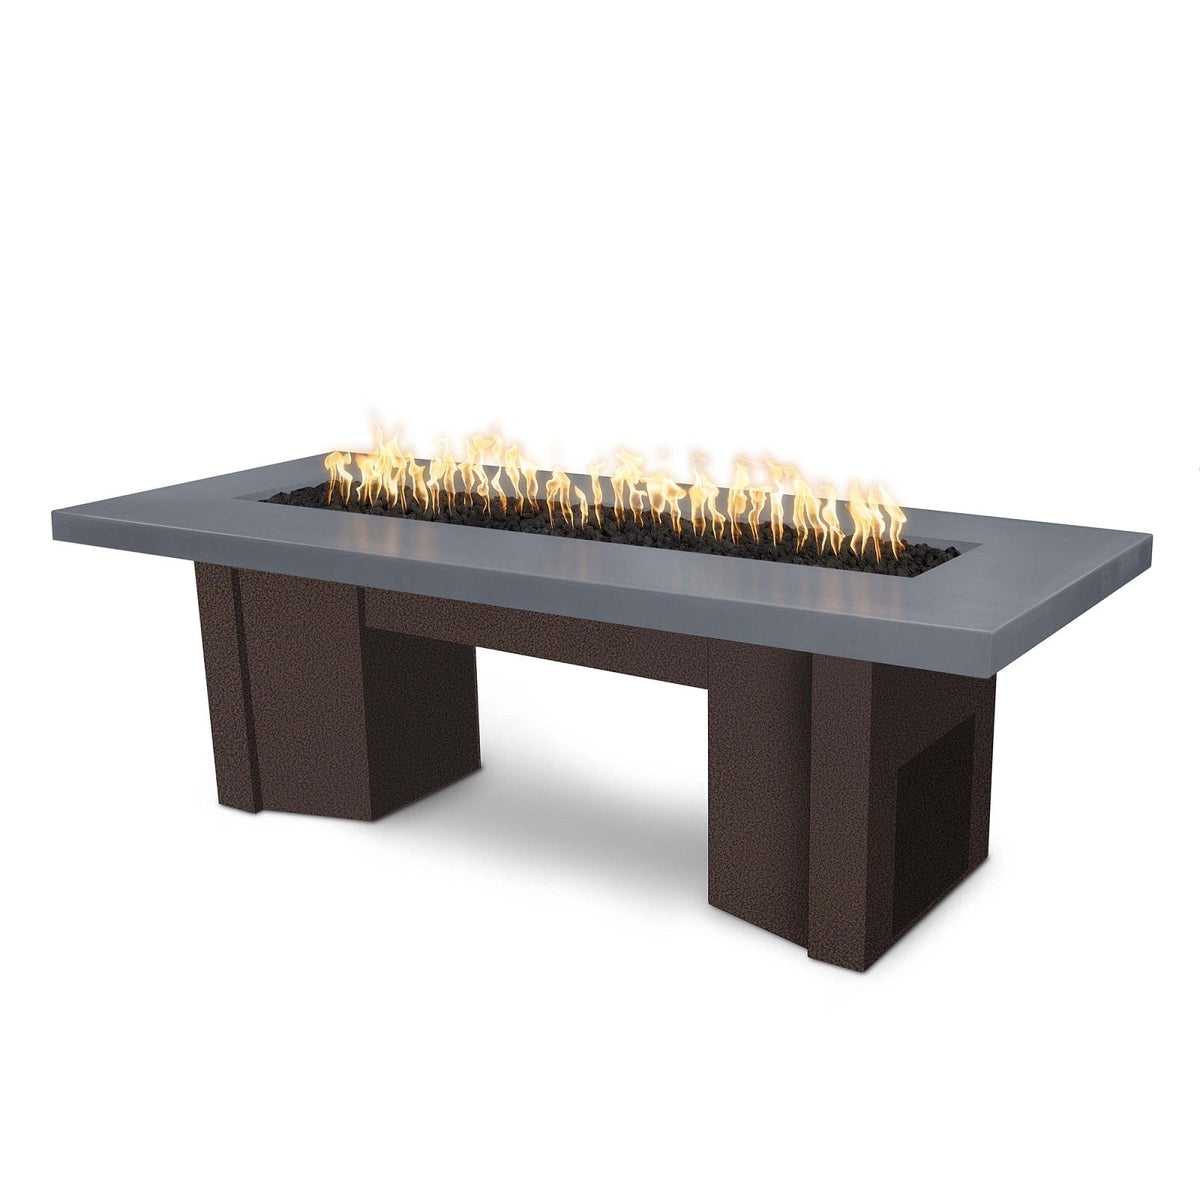 The Outdoor Plus Fire Features Gray (-GRY) / Copper Vein Powder Coated Steel (-CPV) The Outdoor Plus 60&quot; Alameda Fire Table Smooth Concrete in Natural Gas - Match Lit with Flame Sense System / OPT-ALMGFRC60FSML-NG